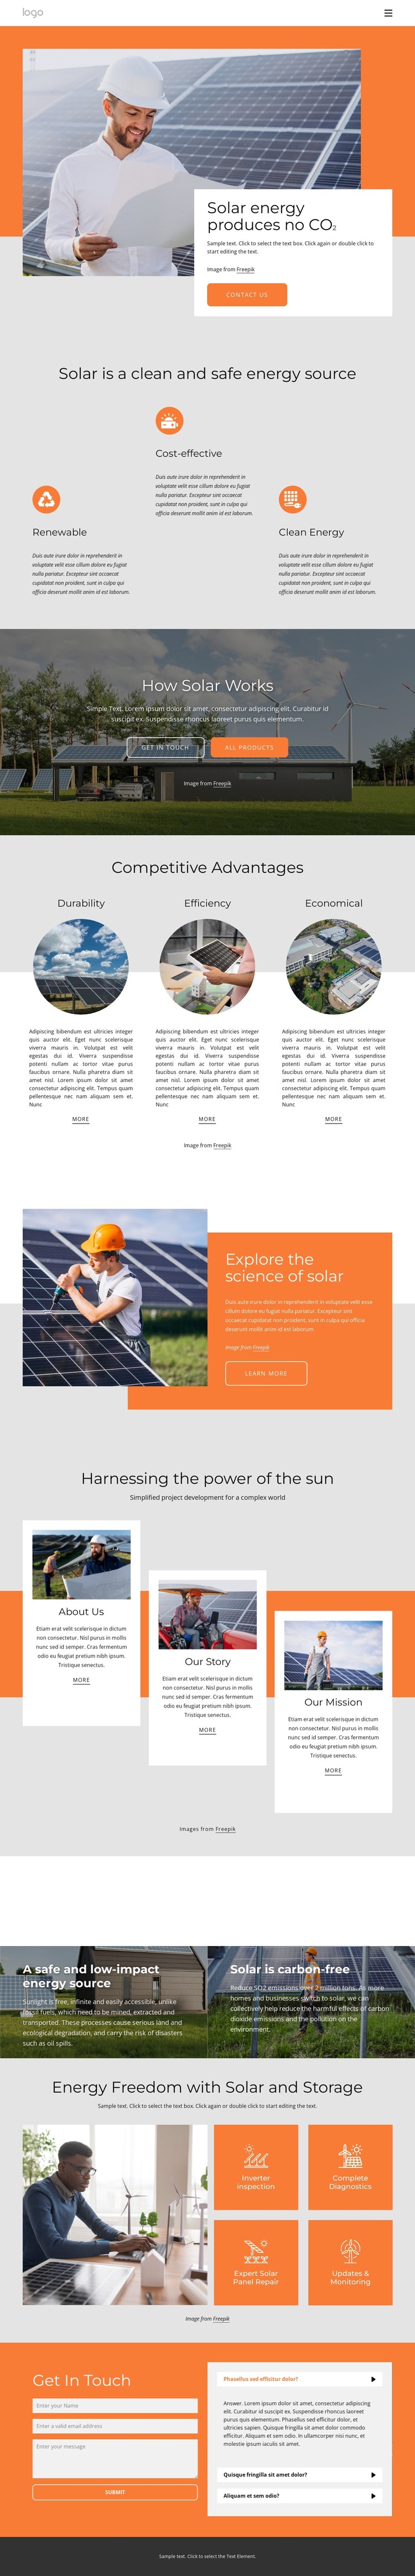 Power your home with clean solar energy Web Design